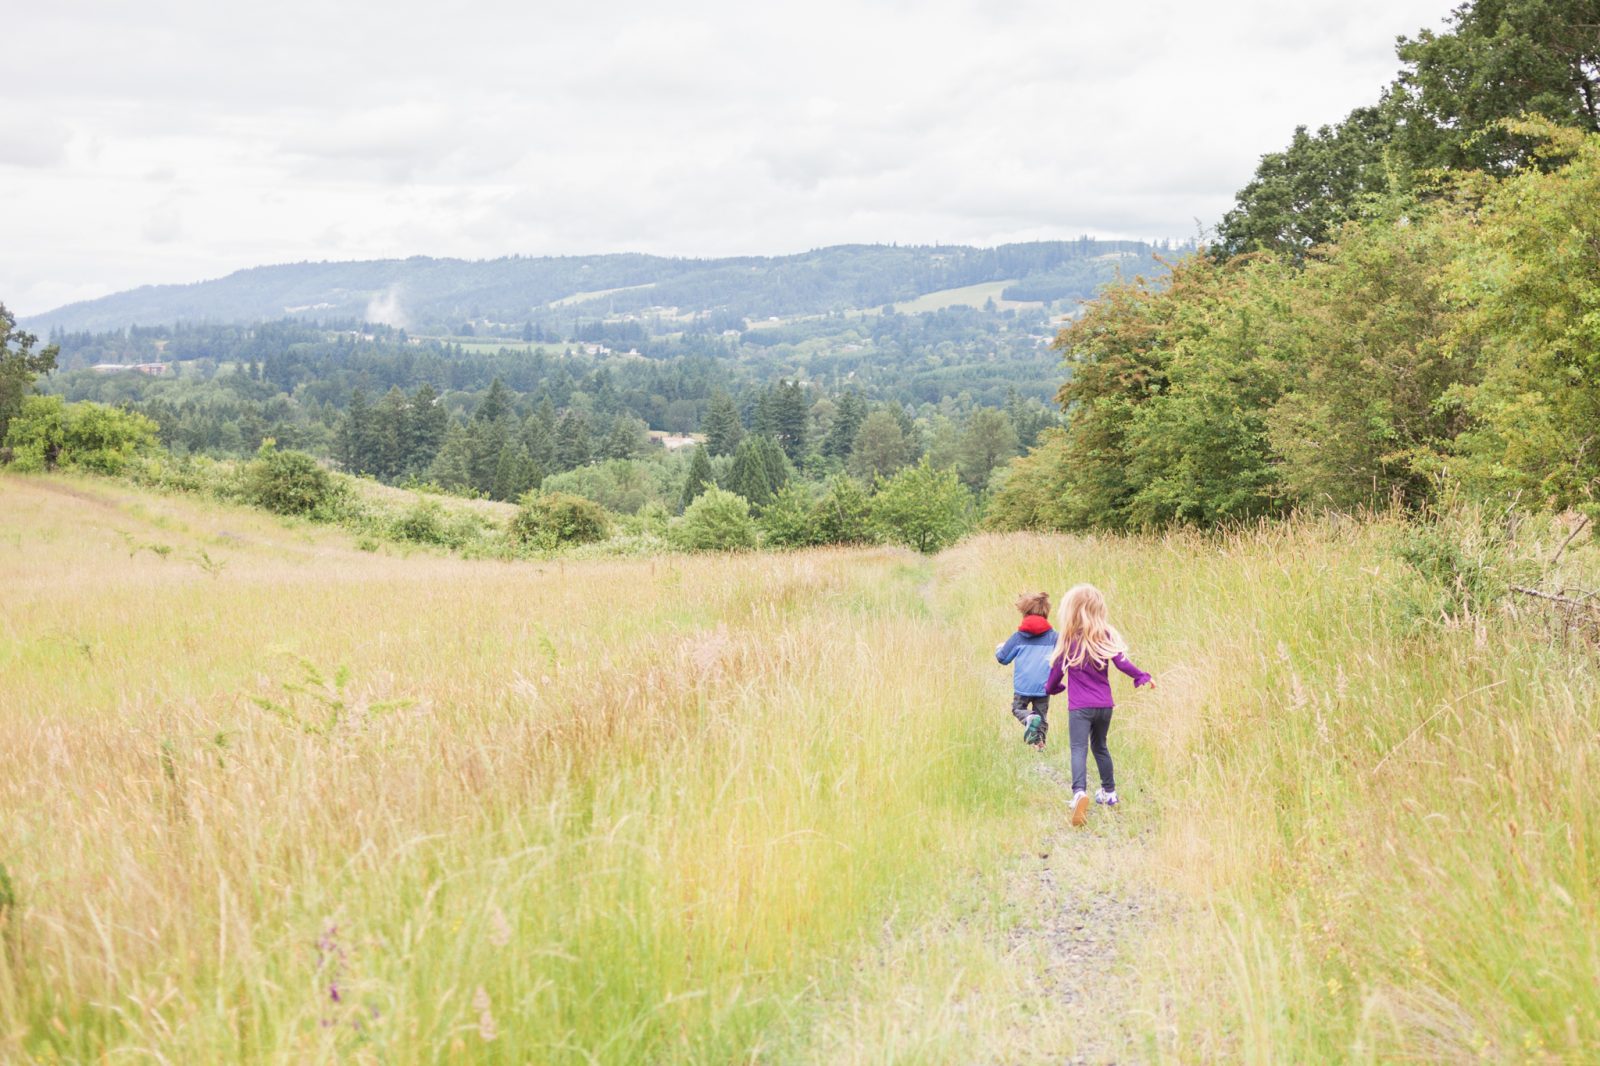 Yamhill county family friendly hike at Schaad Park field in Newberg